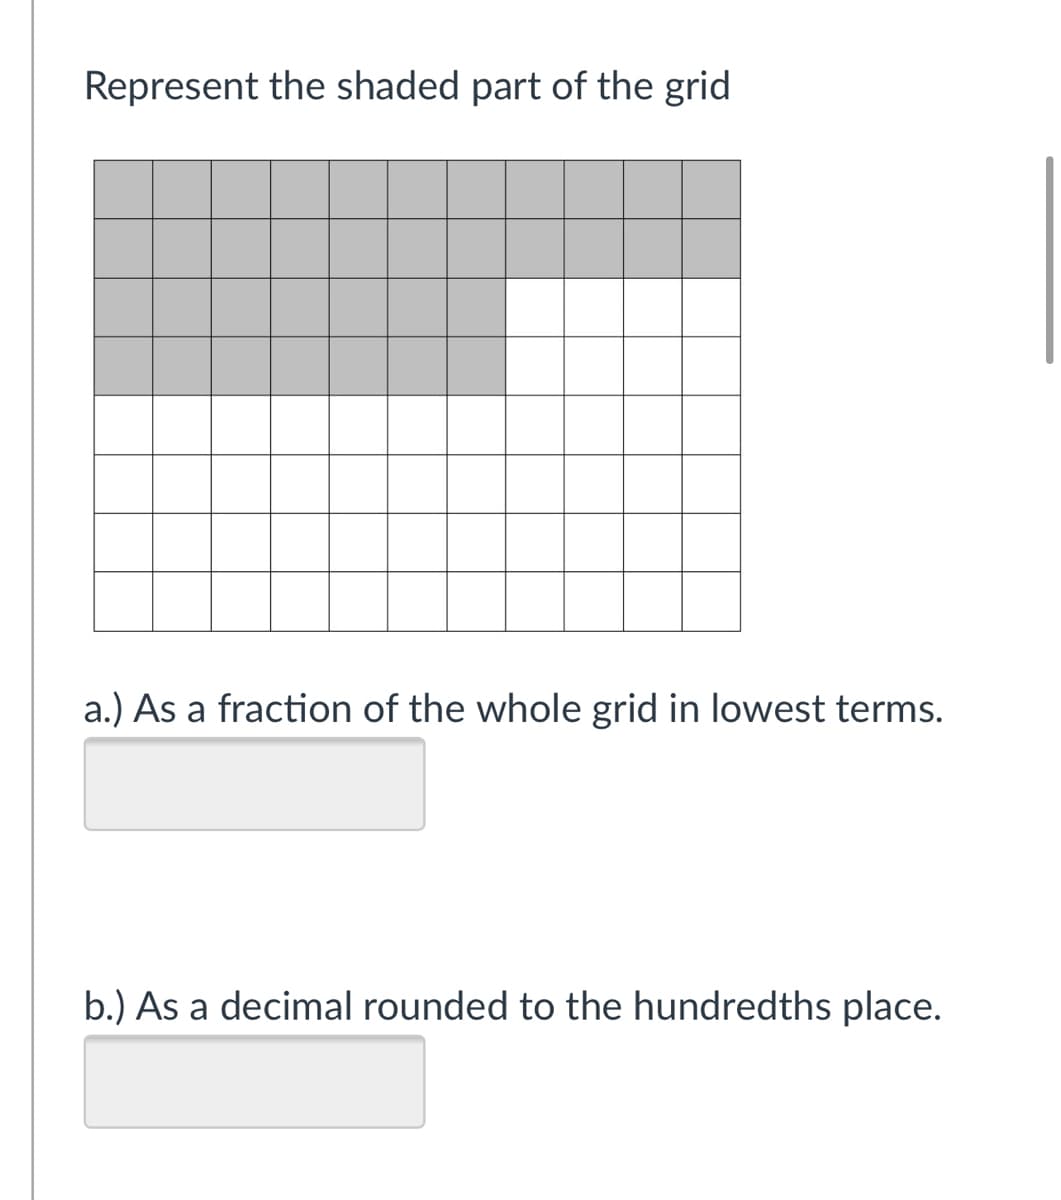 Represent the shaded part of the grid
a.) As a fraction of the whole grid in lowest terms.
b.) As a decimal rounded to the hundredths place.
